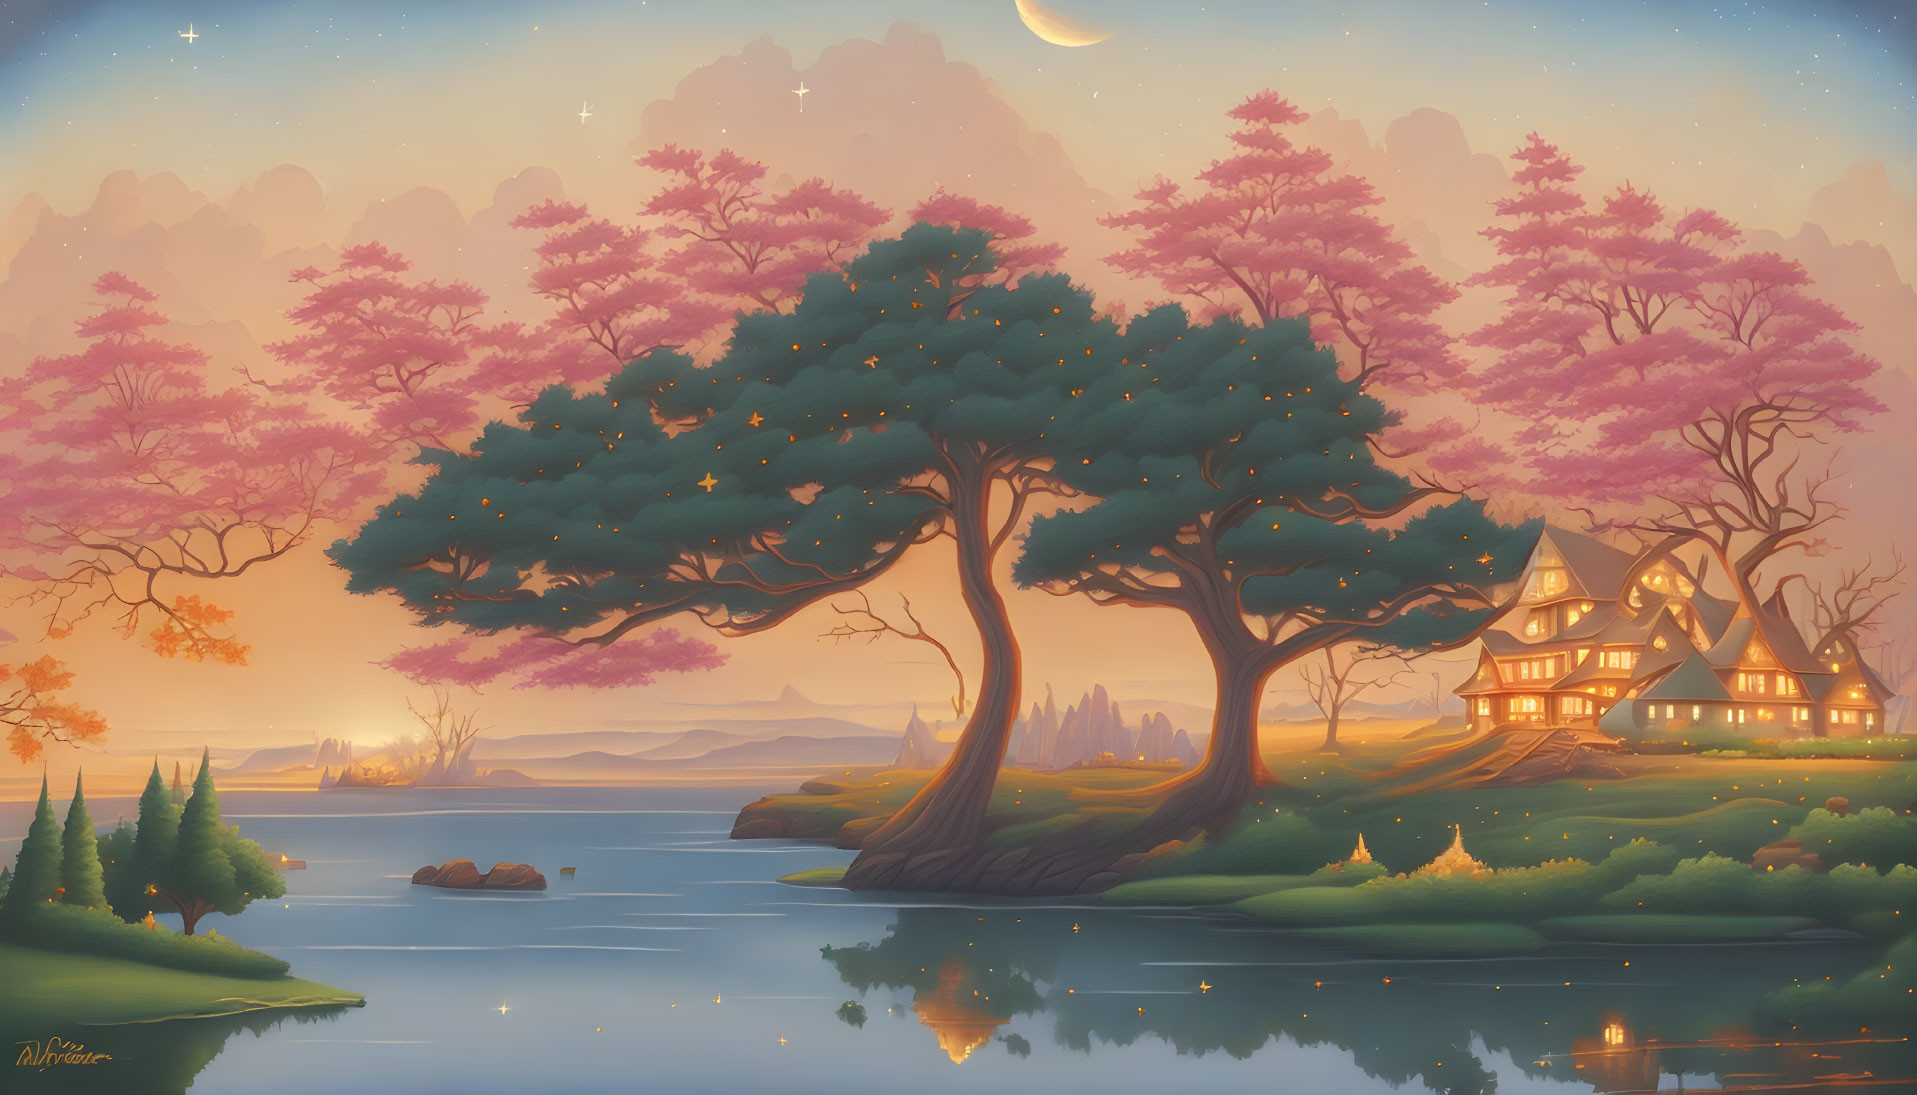 Tranquil twilight landscape with serene lake, tree, house, and pink-hued surroundings under star